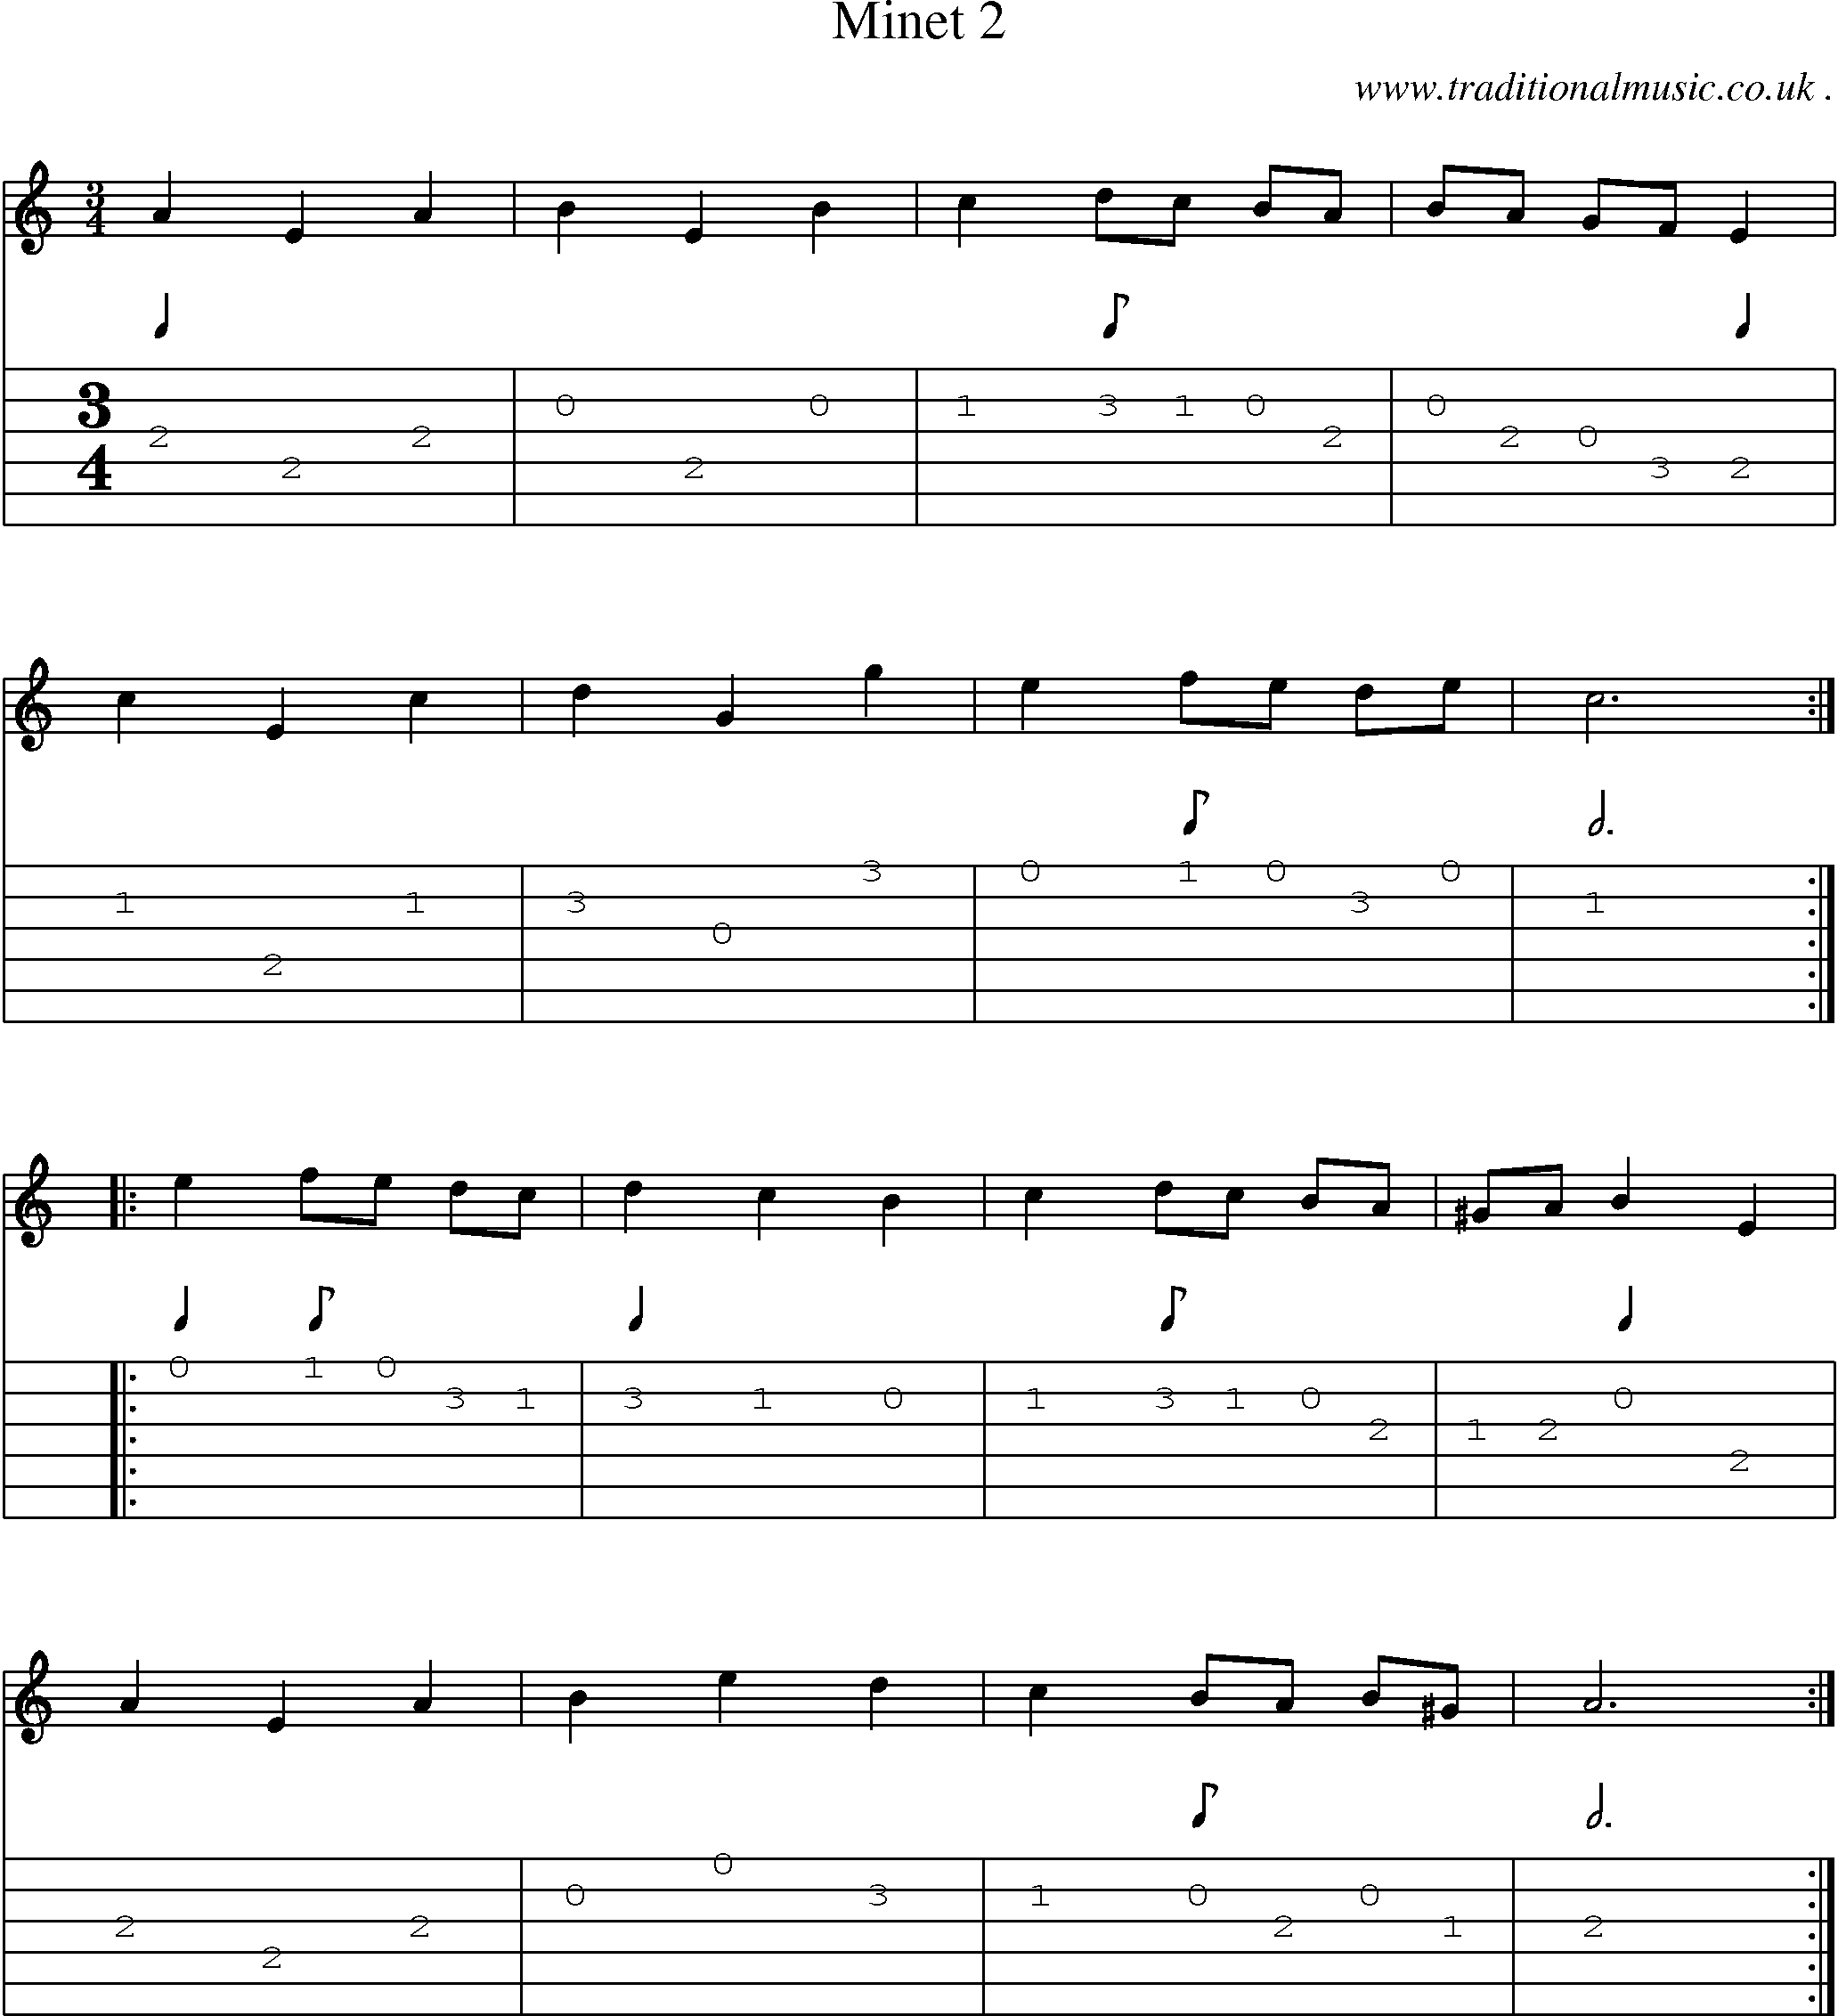 Sheet-Music and Guitar Tabs for Minet 2